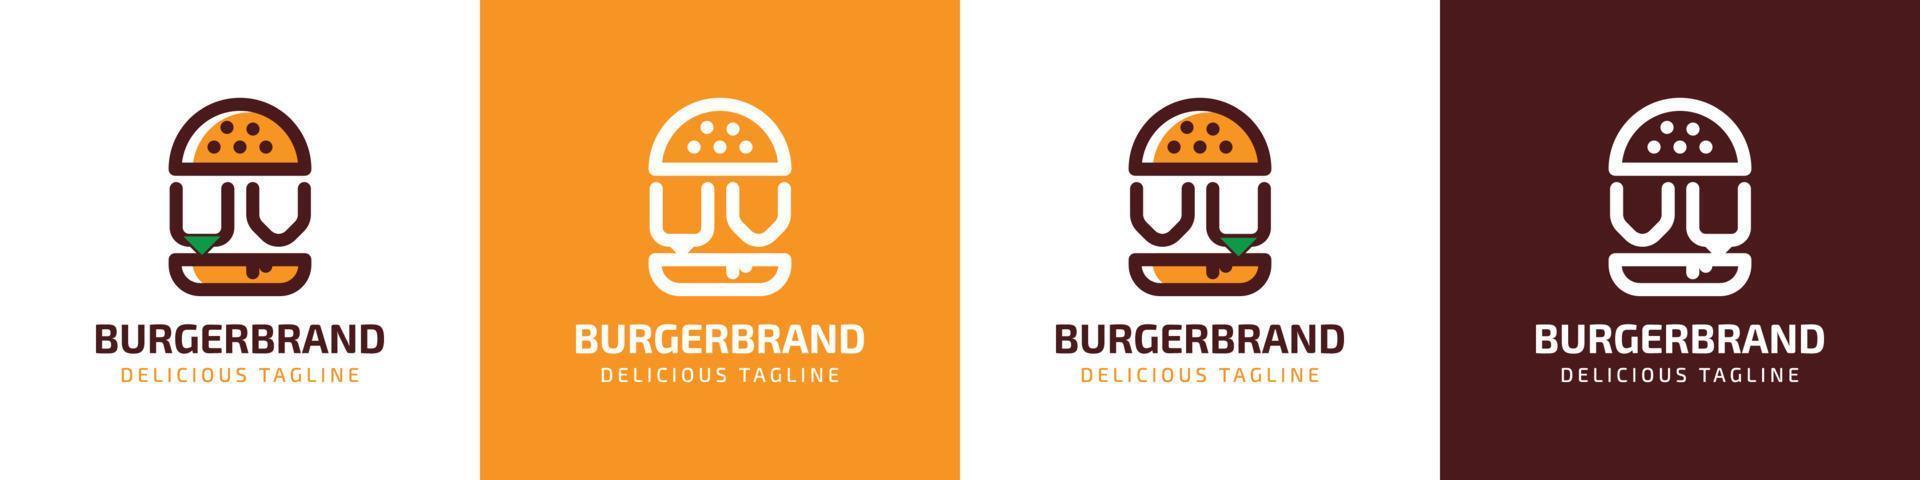 Letter UV and VU Burger Logo, suitable for any business related to burger with UV or VU initials. vector